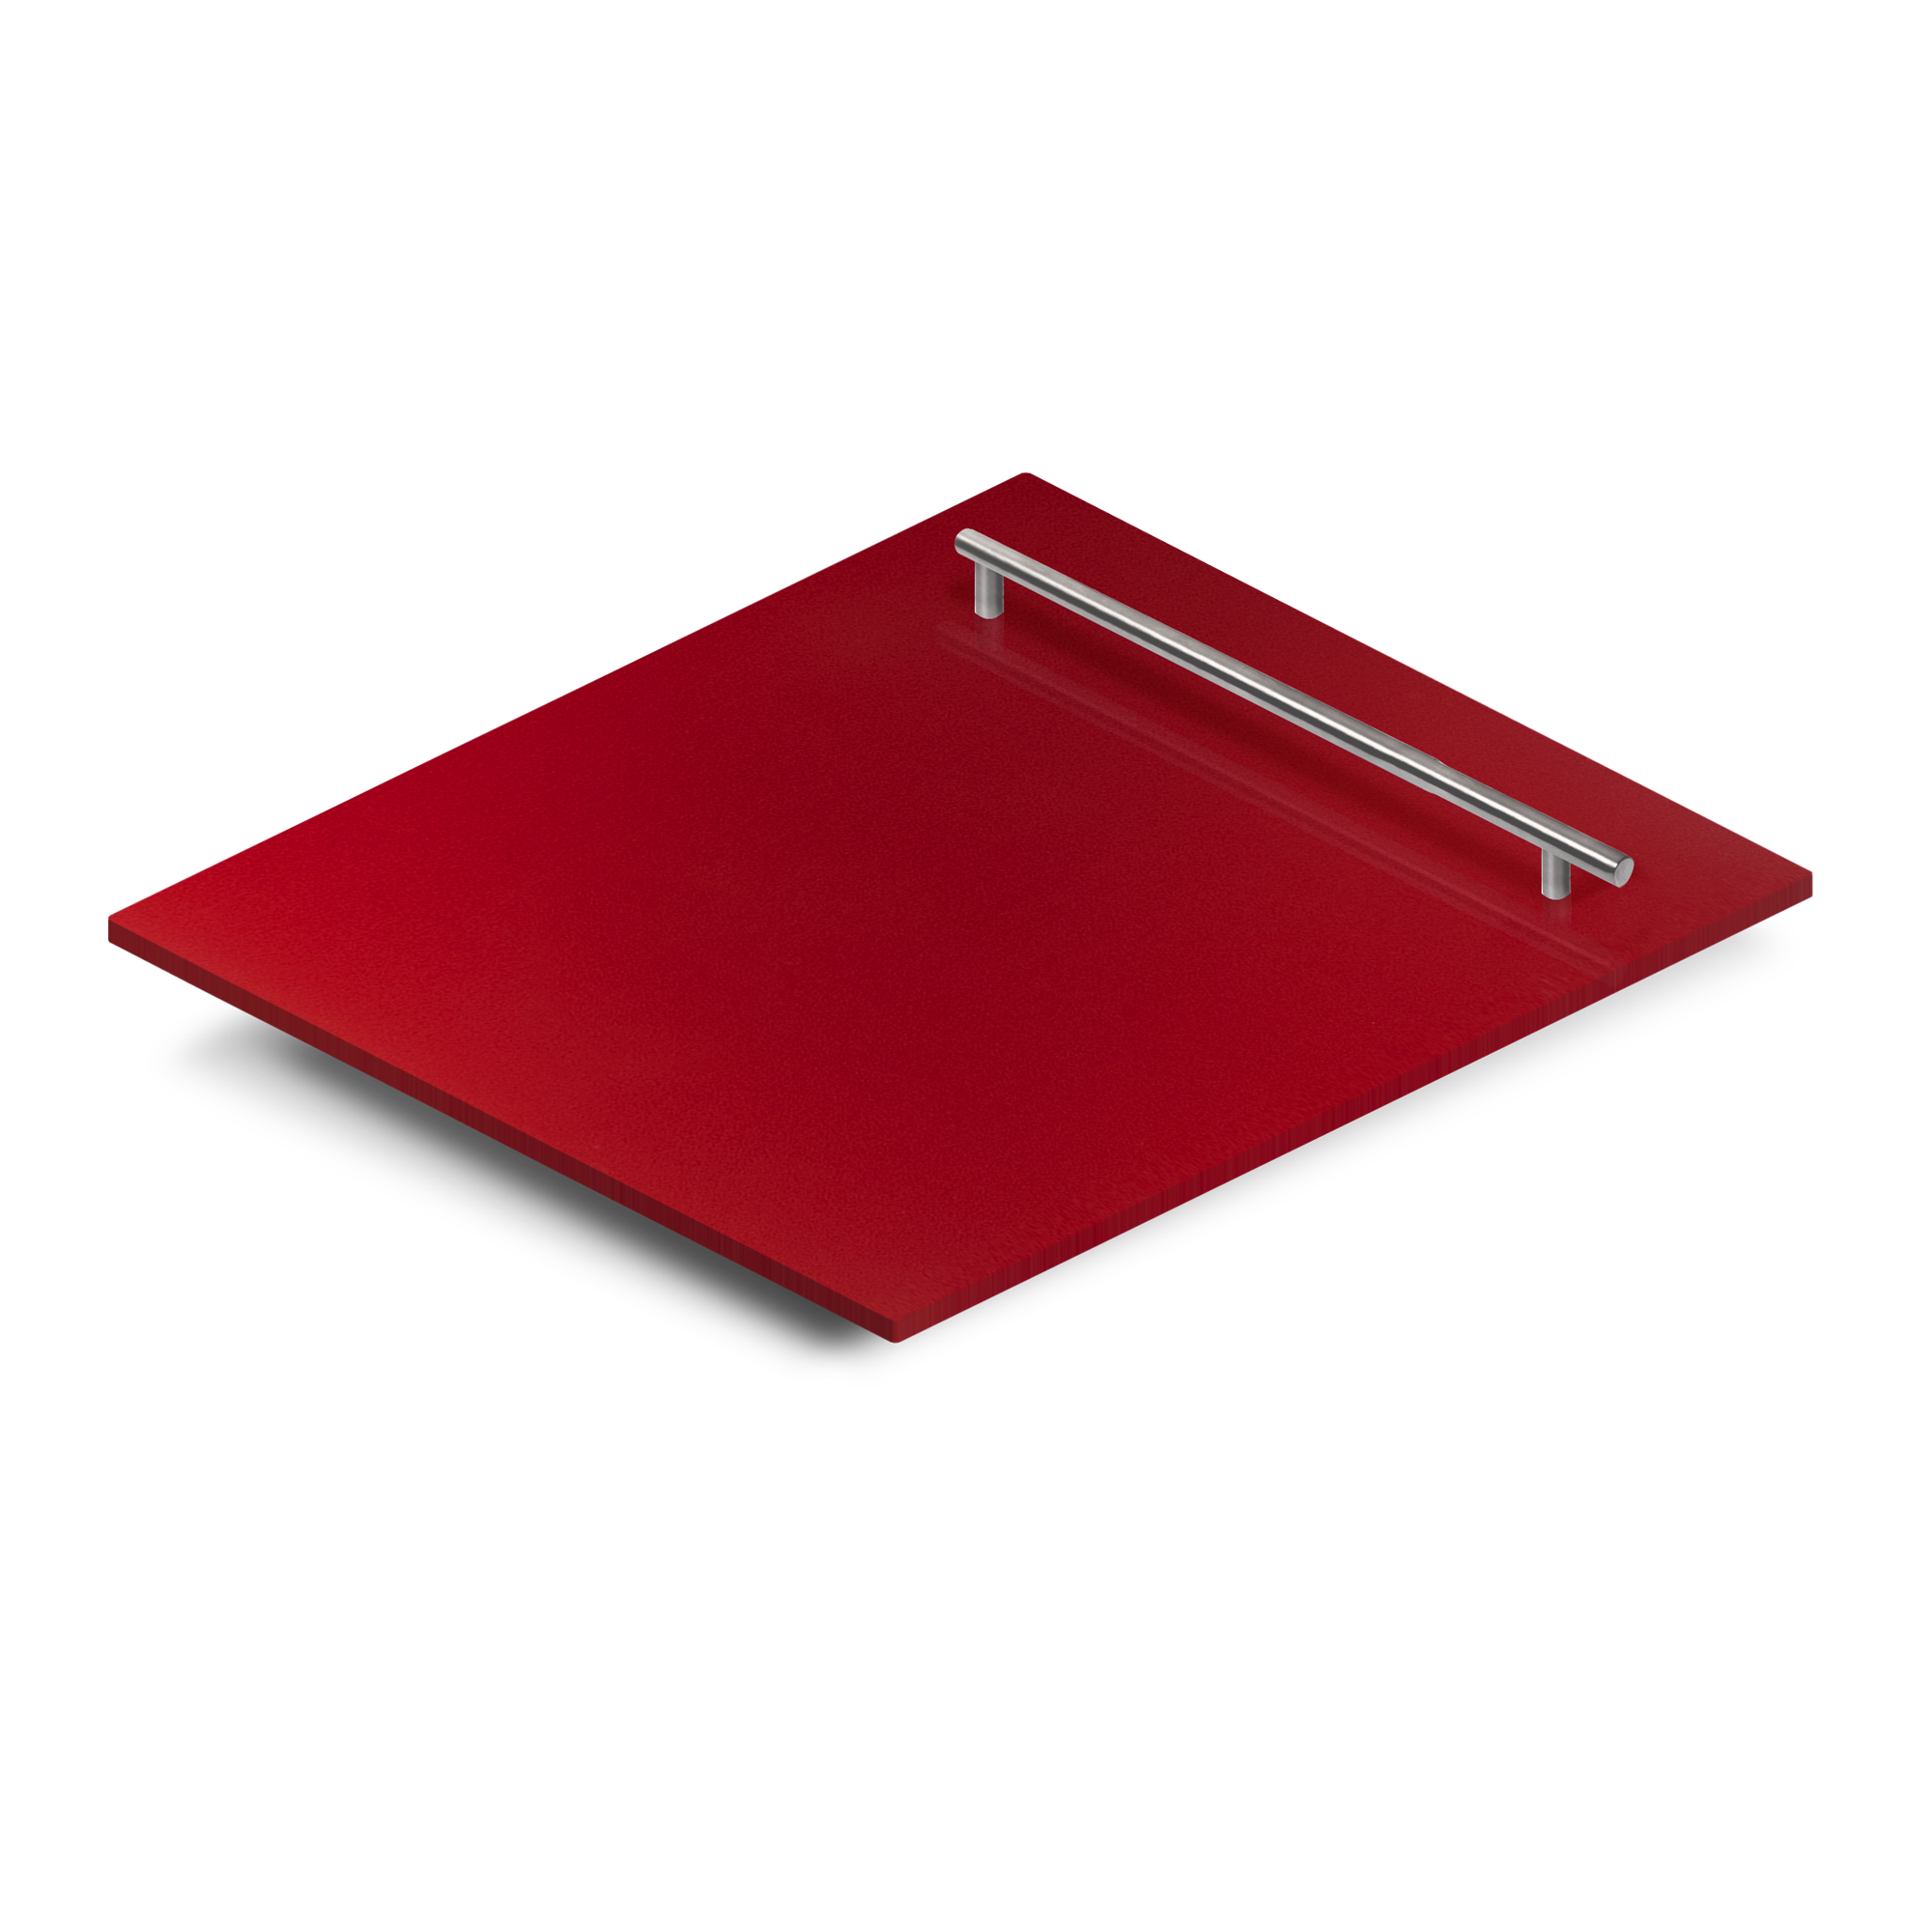 ZLINE 24" Dishwasher Panel in Red Gloss with Modern Handle (DP-RG-H-24)